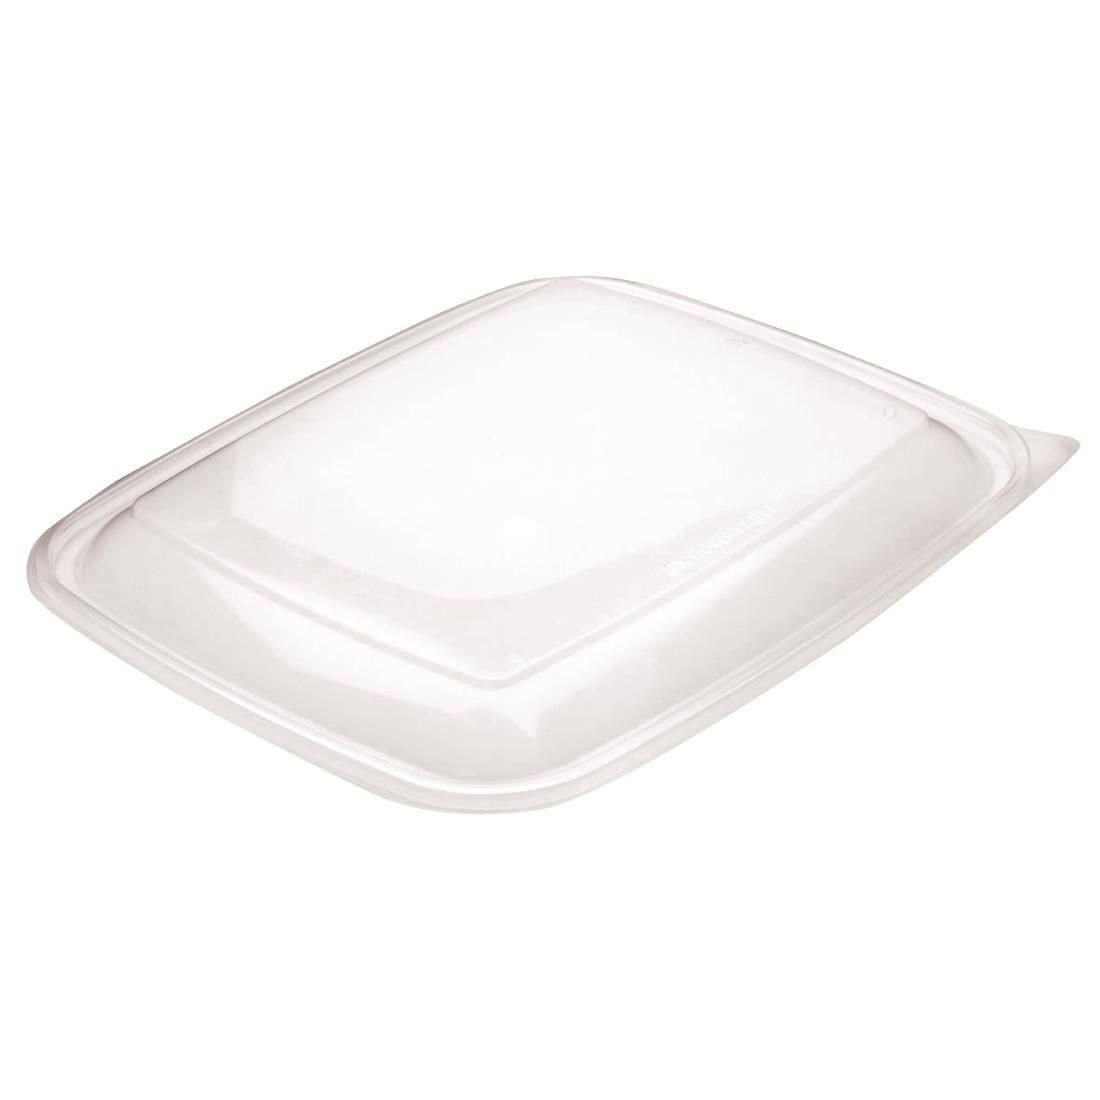 Fastpac Large Rectangular Food Container Lids 1350ml / 48oz (Pack of 150) - DW785  - 1